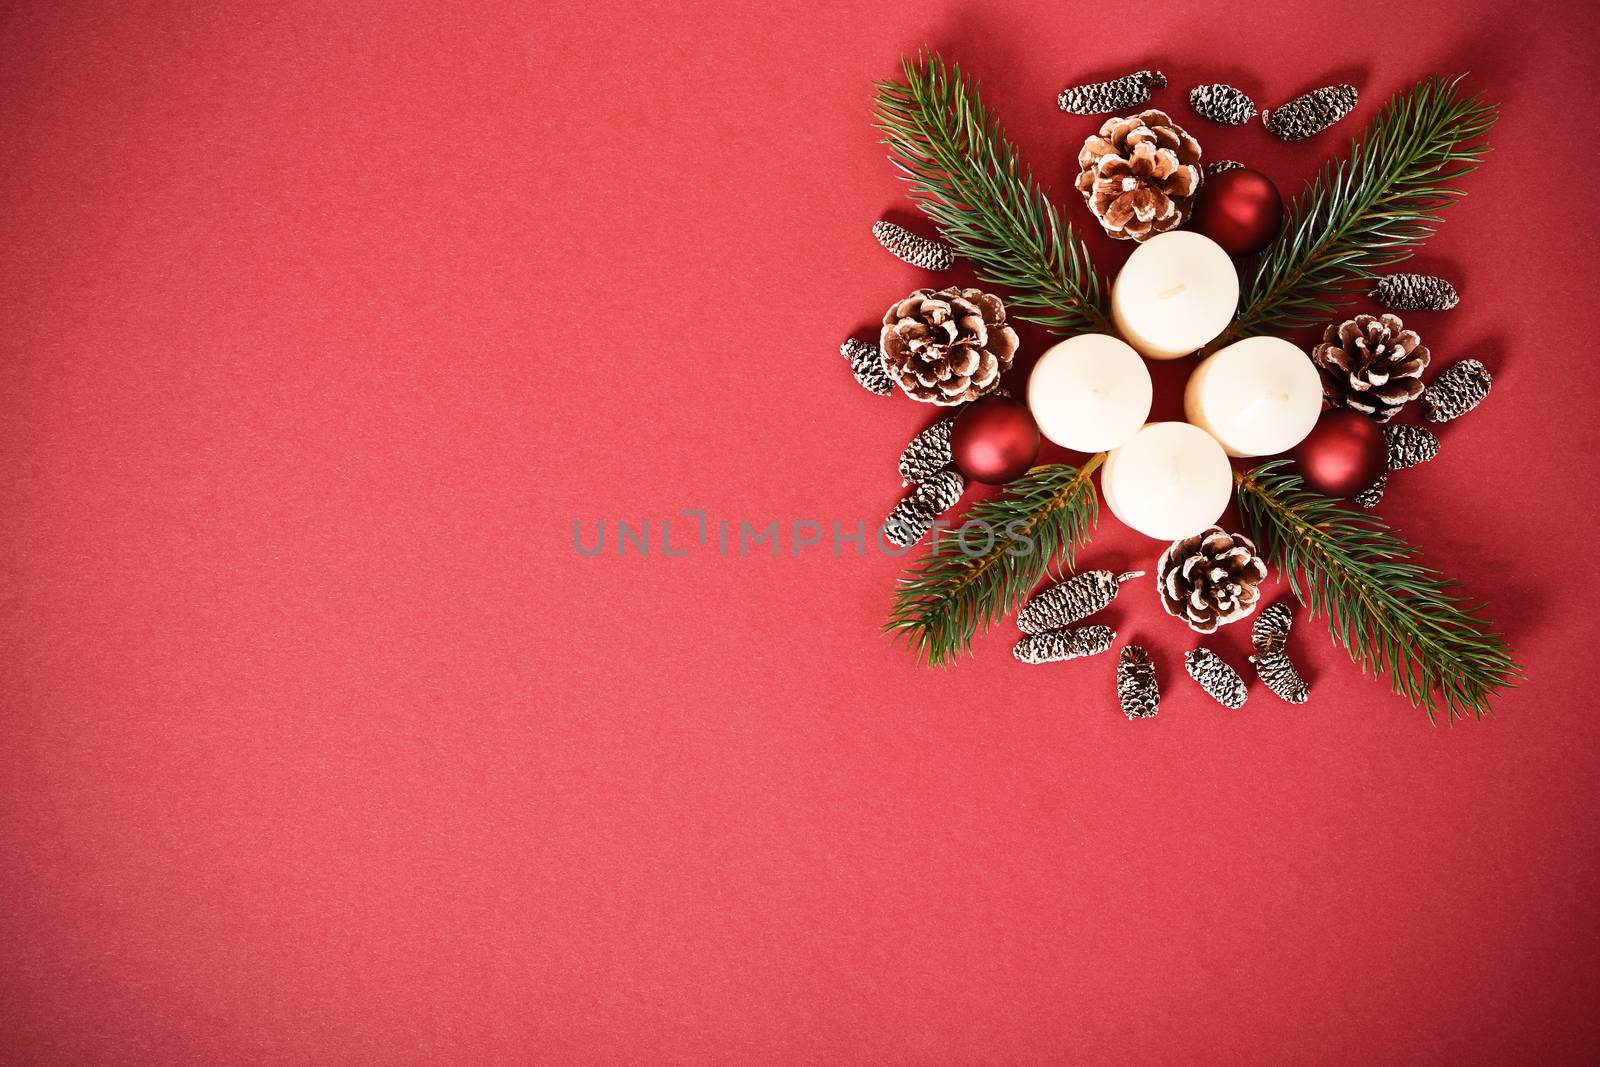 Seasonal greeting card concept with candles, pinecones and everg by Mendelex